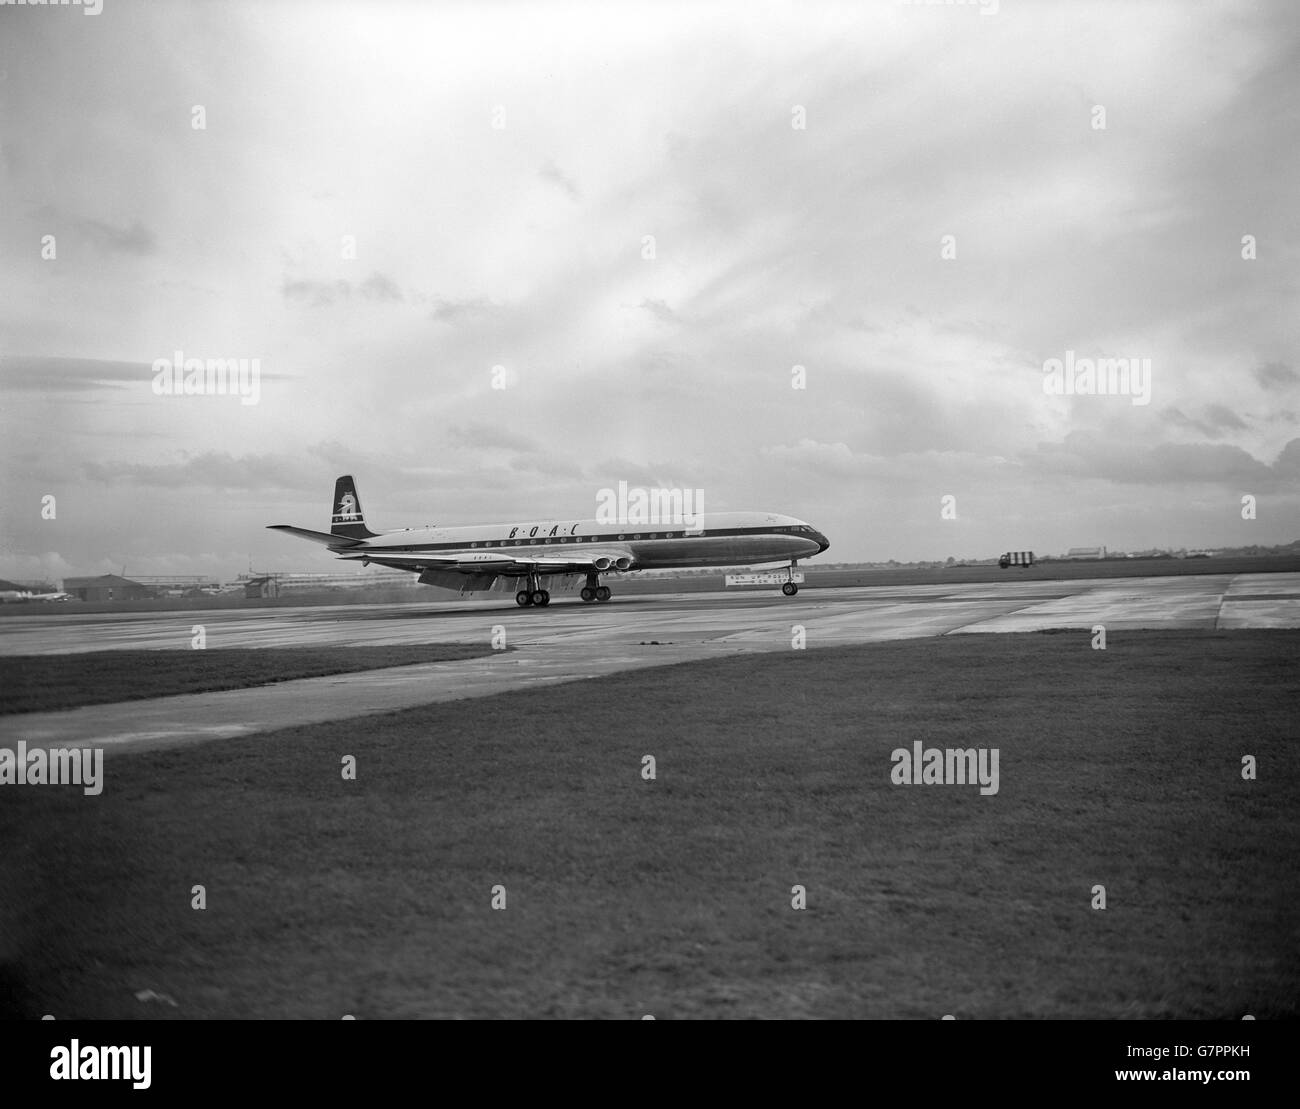 BOAC's Comet 4 jetliner Delta Bravo touches down at London Airport after the inaugural west-east flight of the first commercial jetliner service across the Atlantic. The plane had set up a new record for civilian aircraft by flying the 3,560 miles from New York in six hours seven minutes at an average speed of 580 miles an hour. Her total time in the air was six hours, 12 minutes. Stock Photo